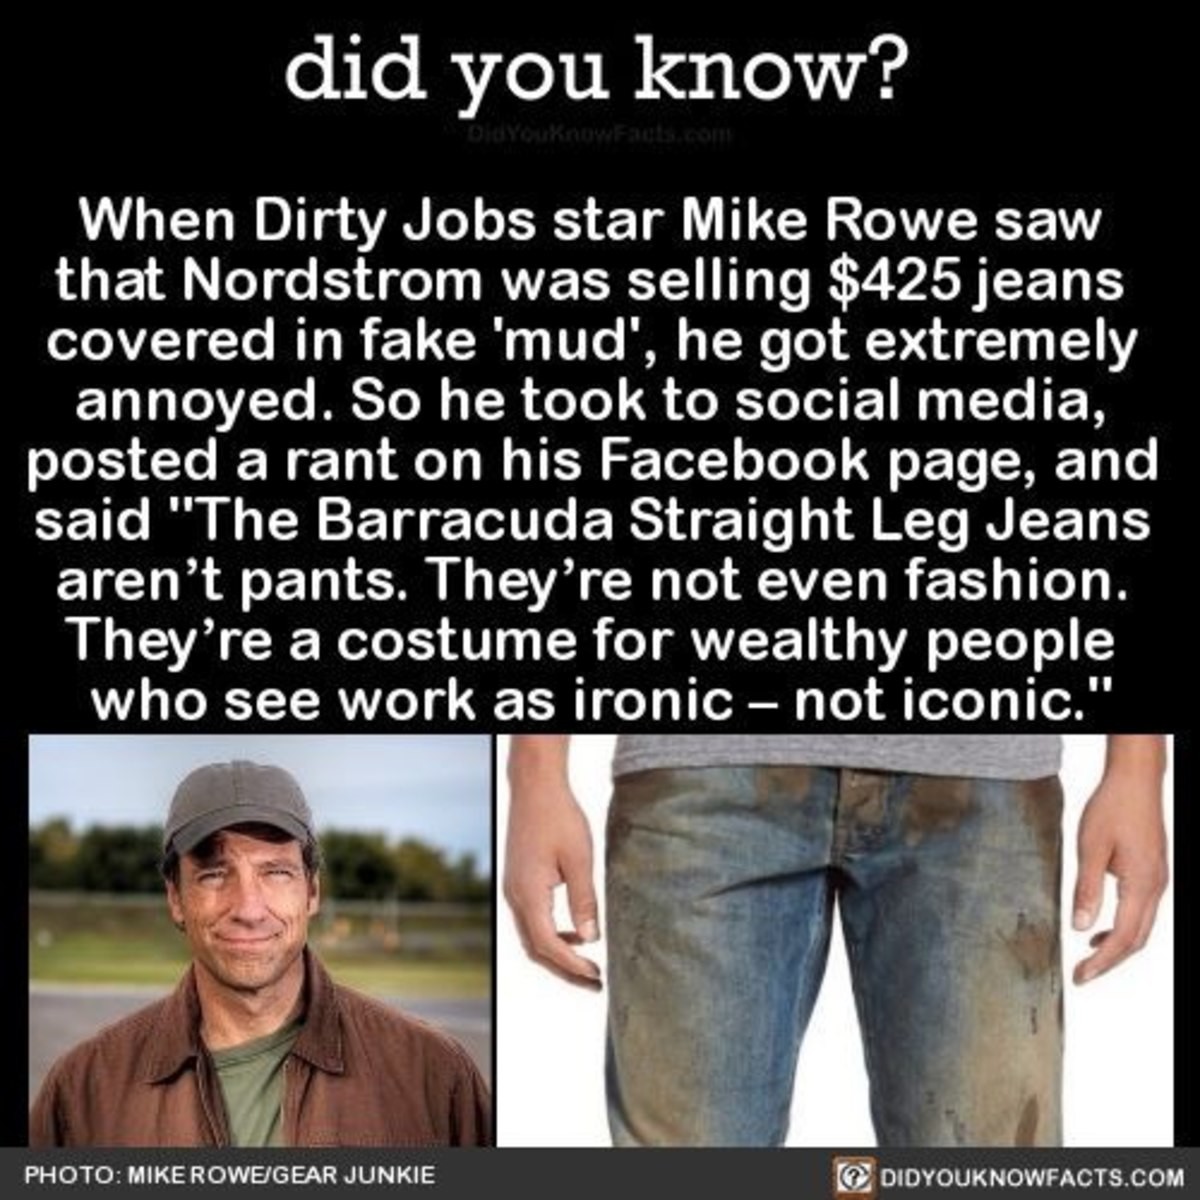 So so this he is get. Dirty jobs. Did you know facts. Did you know? Interesting facts.